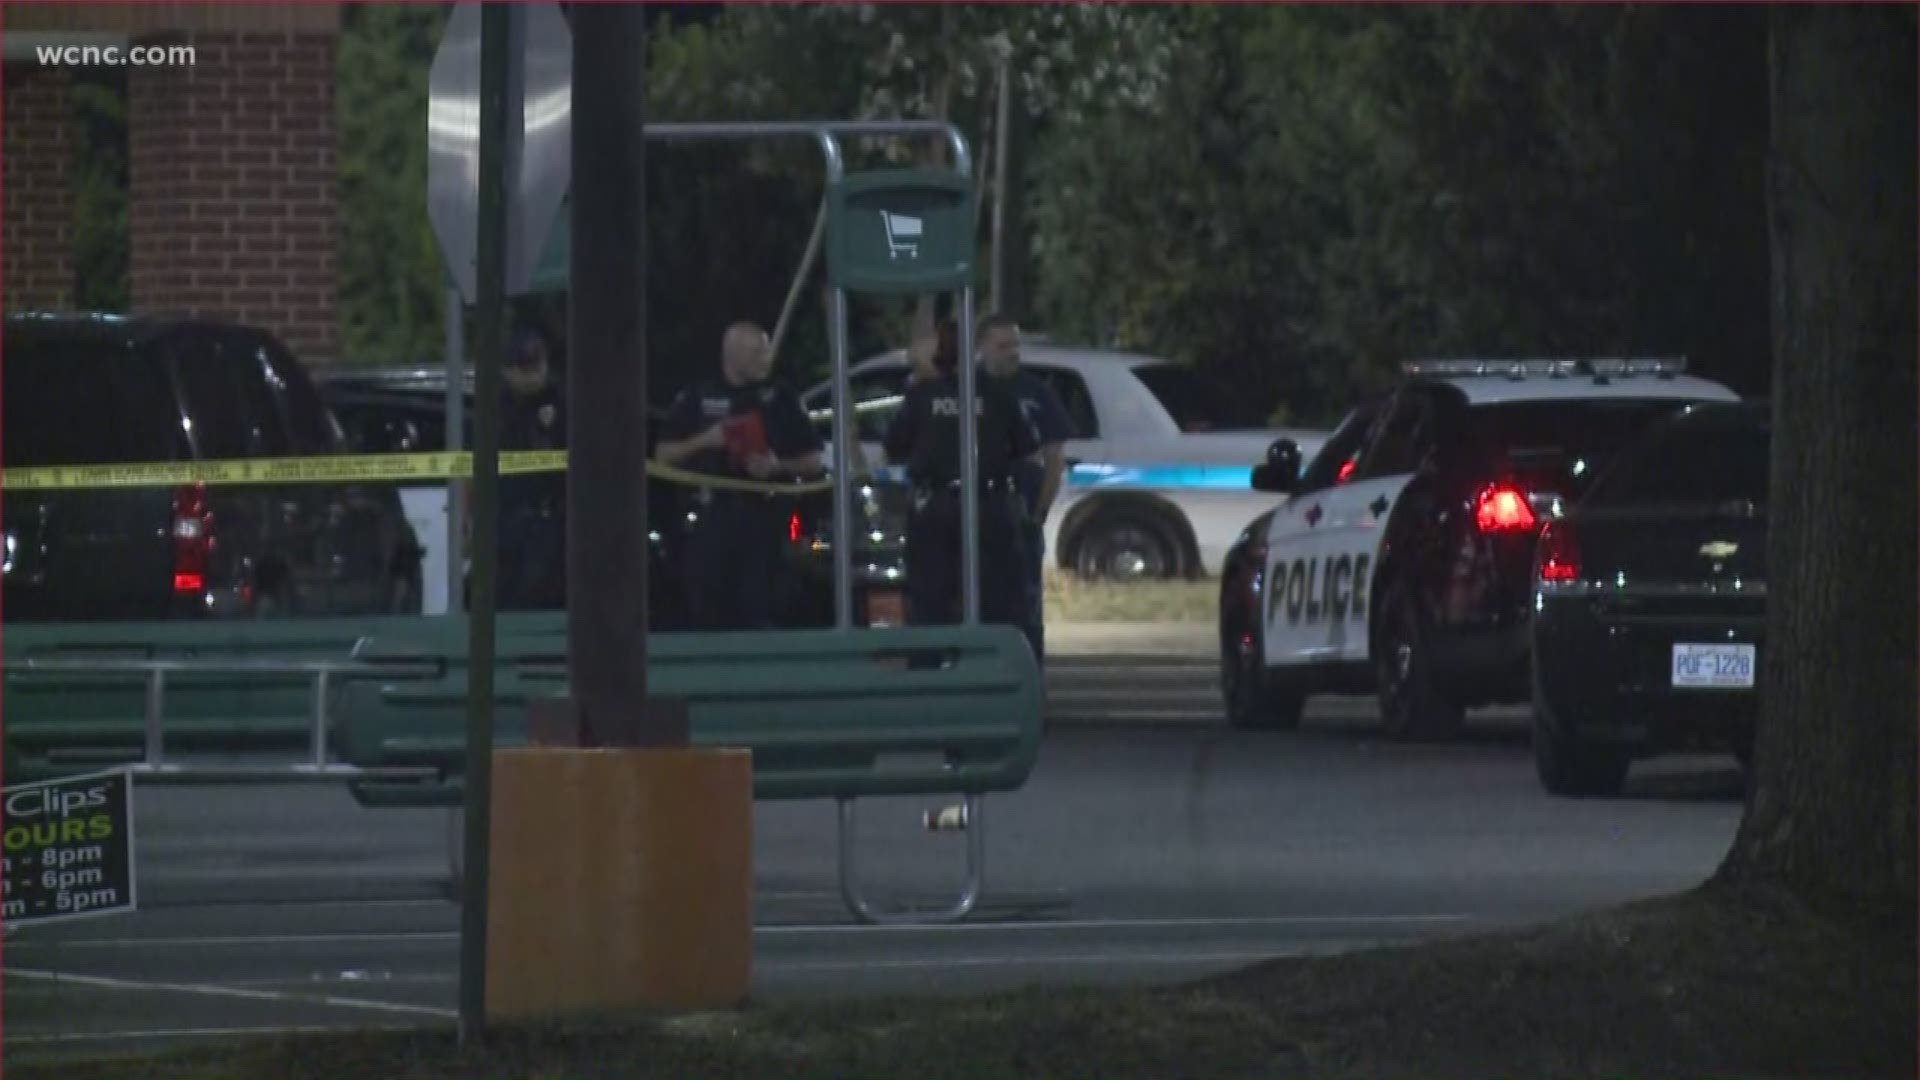 An armed robbery suspect was shot by police after taking several people hostage inside a Salisbury Harris Teeter.